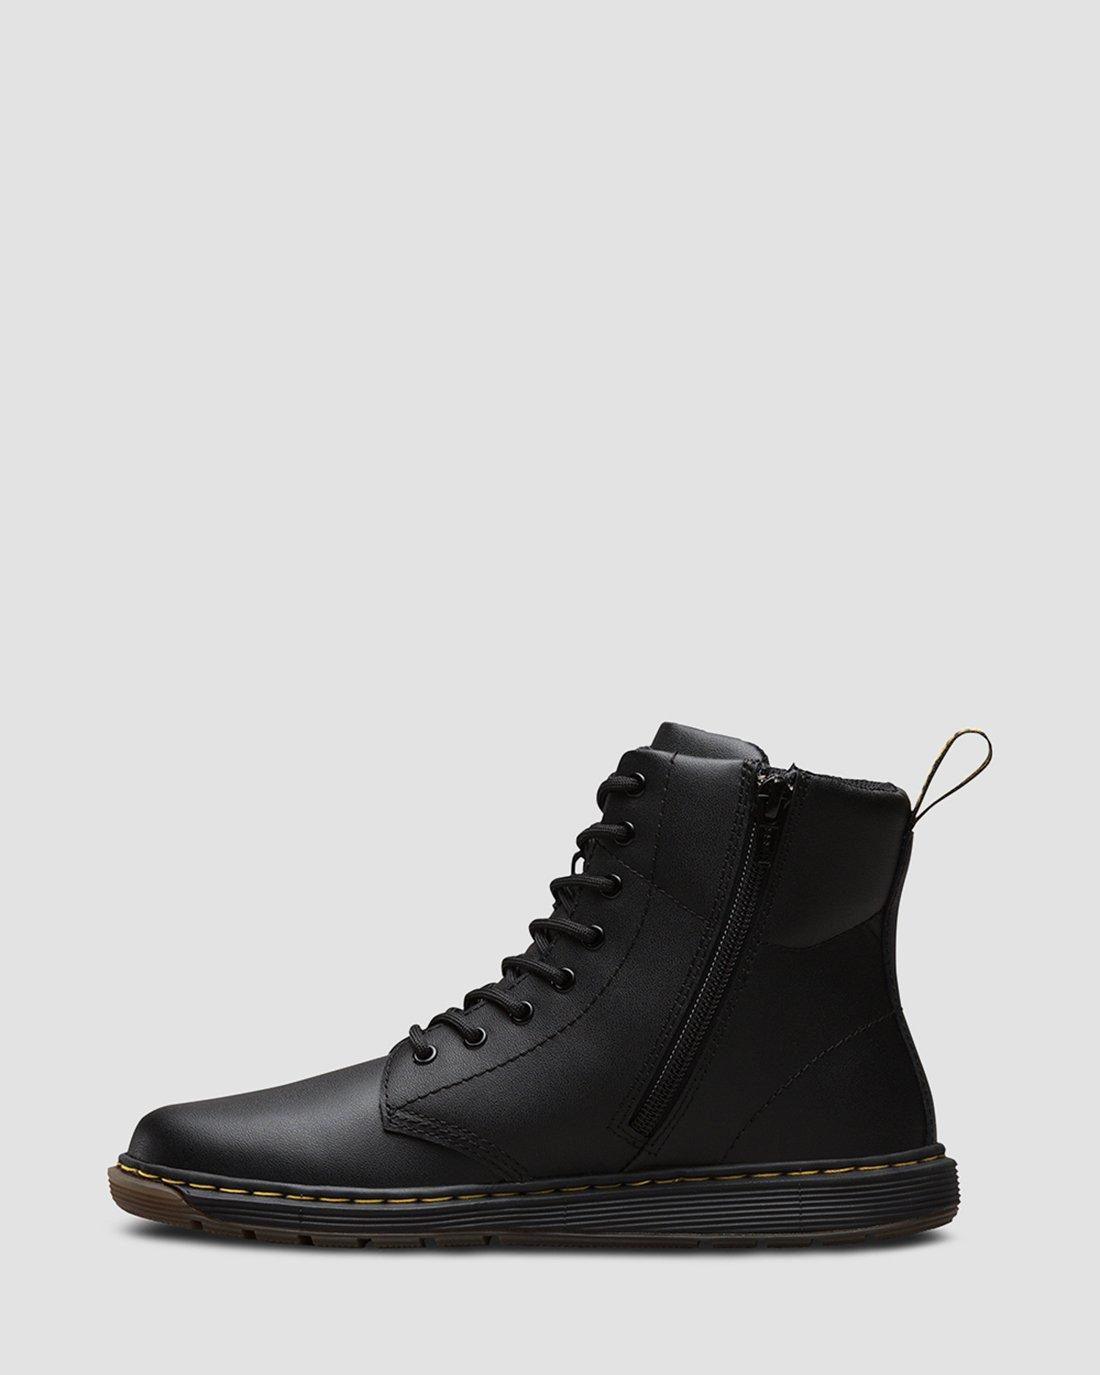 YOUTH MALKY LEATHER | Dr. Martens UK